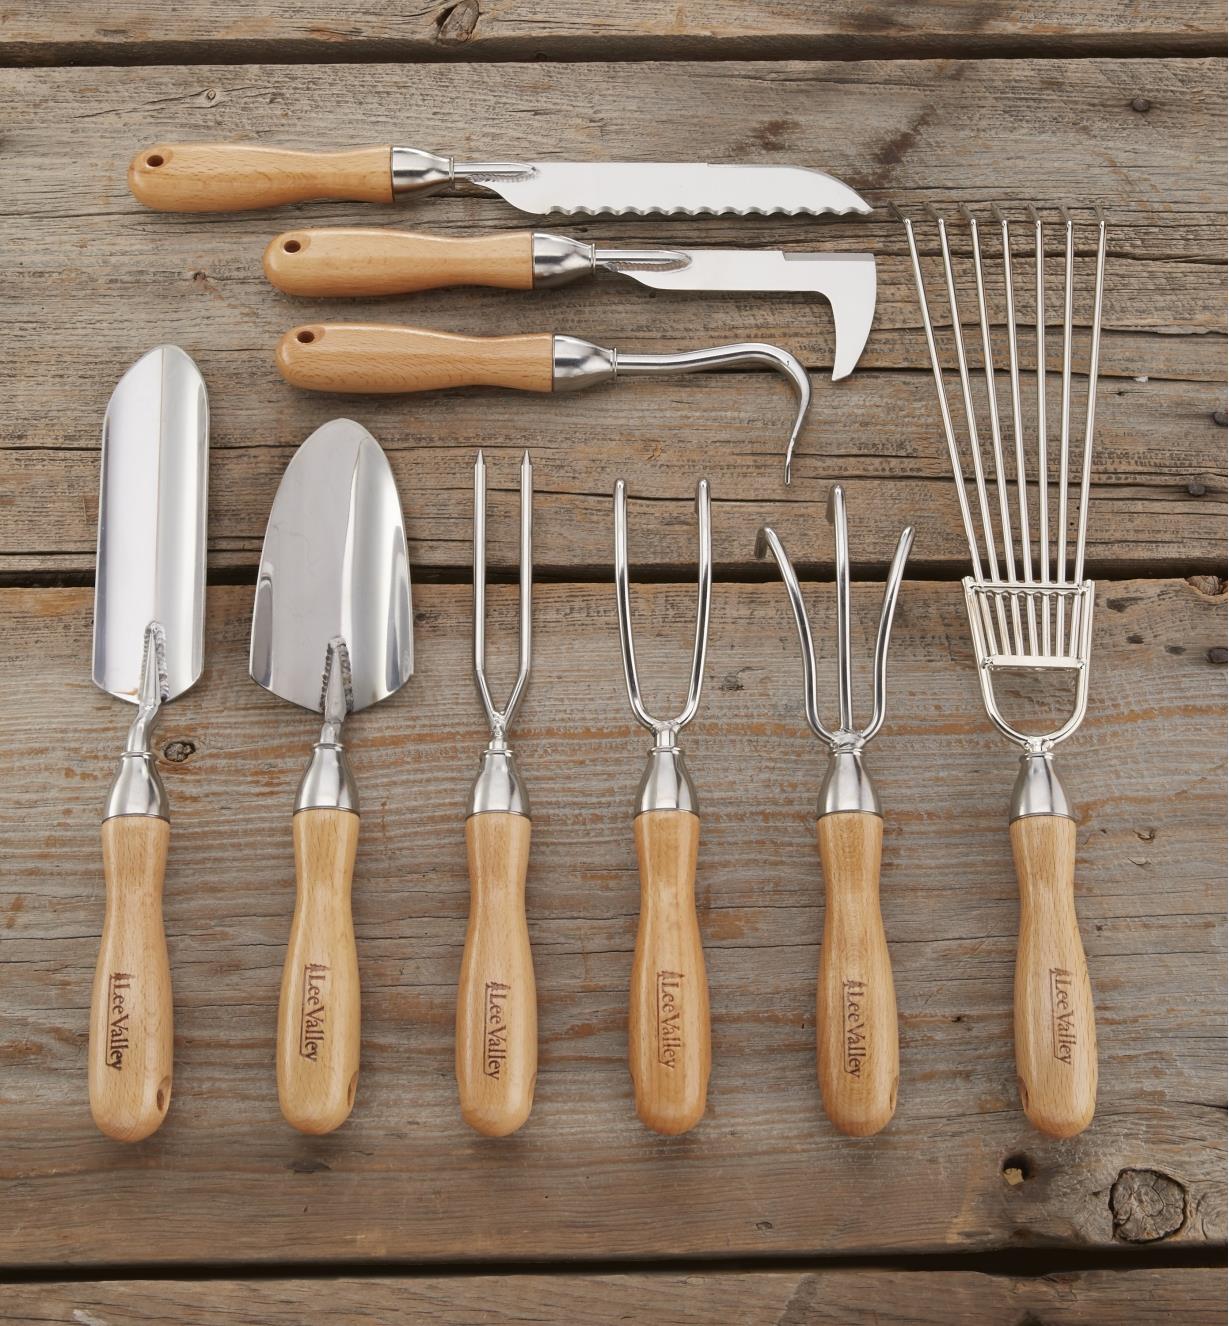 AB634 - Set of 9 Lee Valley Garden Tools